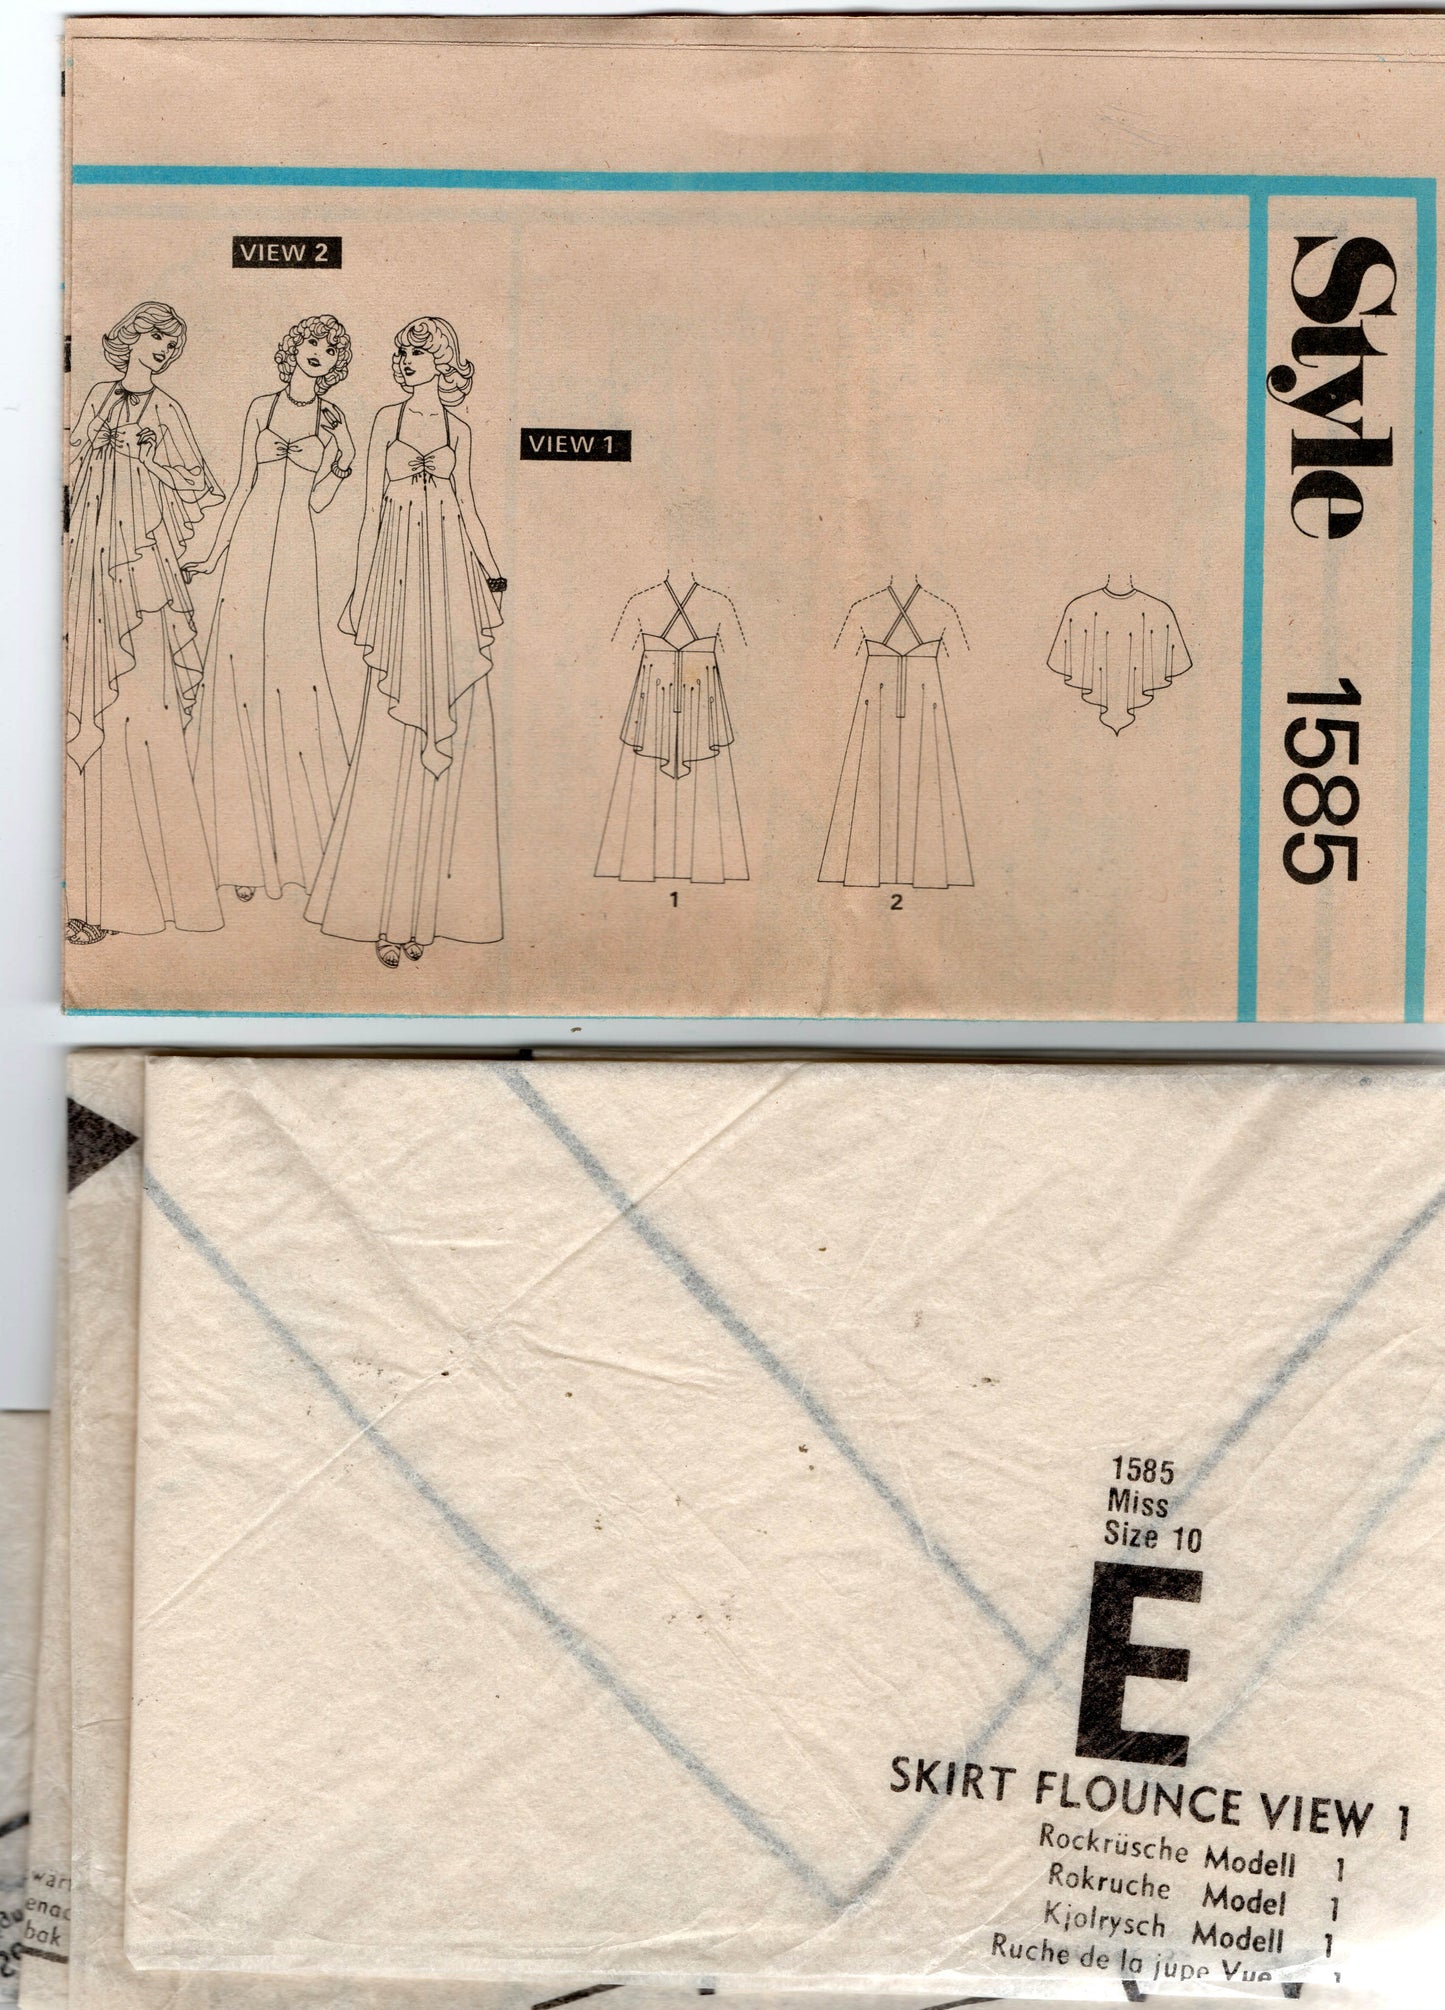 Style 1585 Womens High Waisted Handkerchief Maxi Dress & Evening Cape 1970s Vintage Sewing Pattern Size 10 Bust 32.5 inches